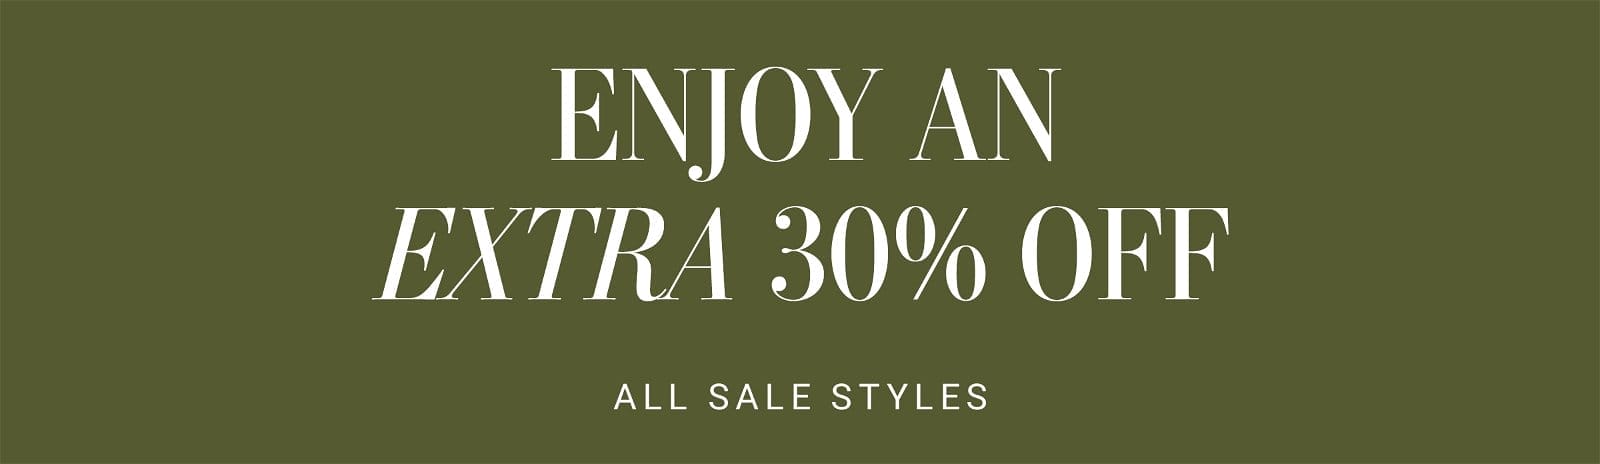 ENJOY AN EXTRA 30% OFF ALL SALE STYLES